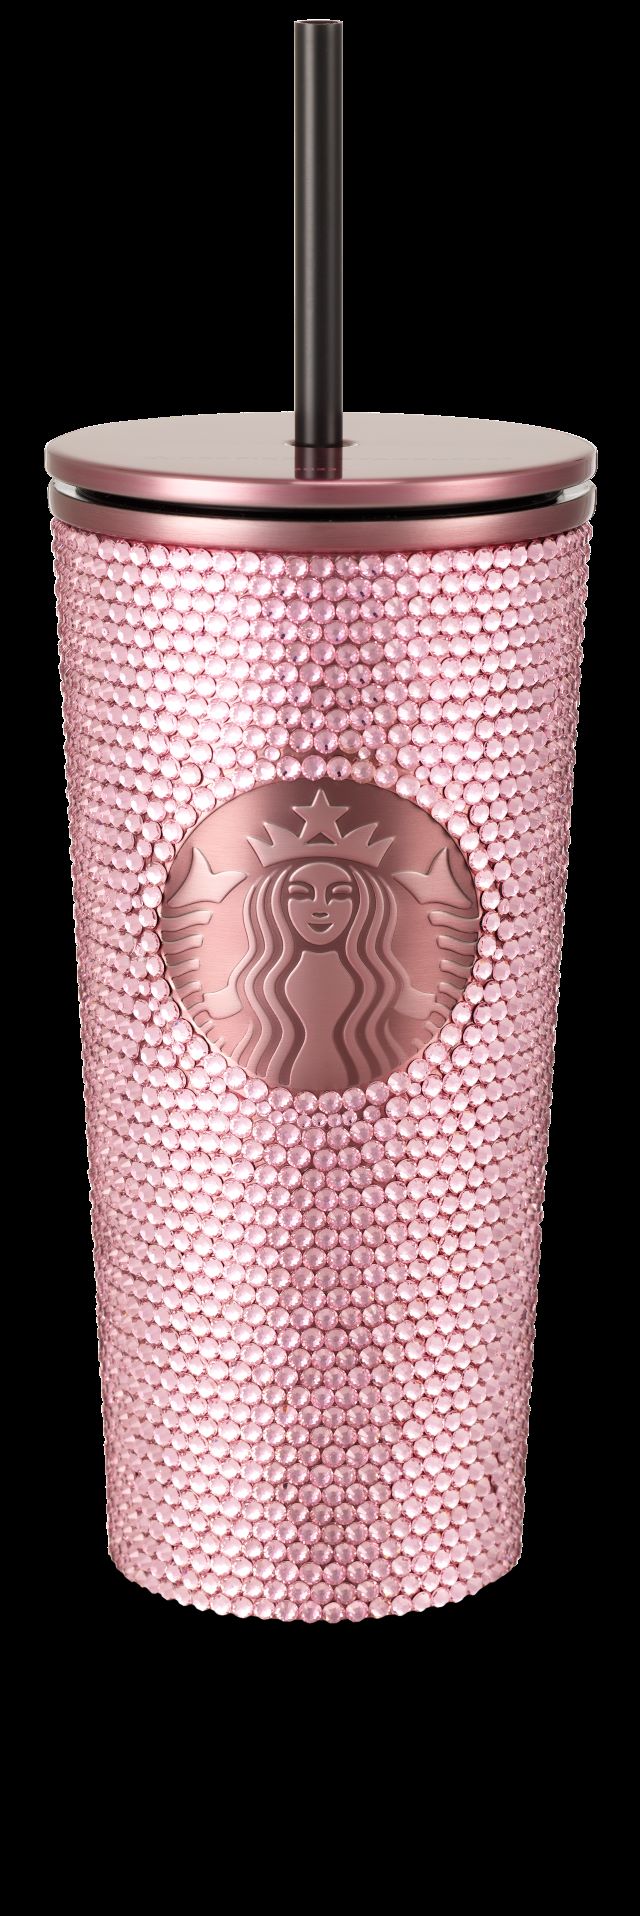 First Look at the BLACKPINK x Starbucks Collection: Details, Availability